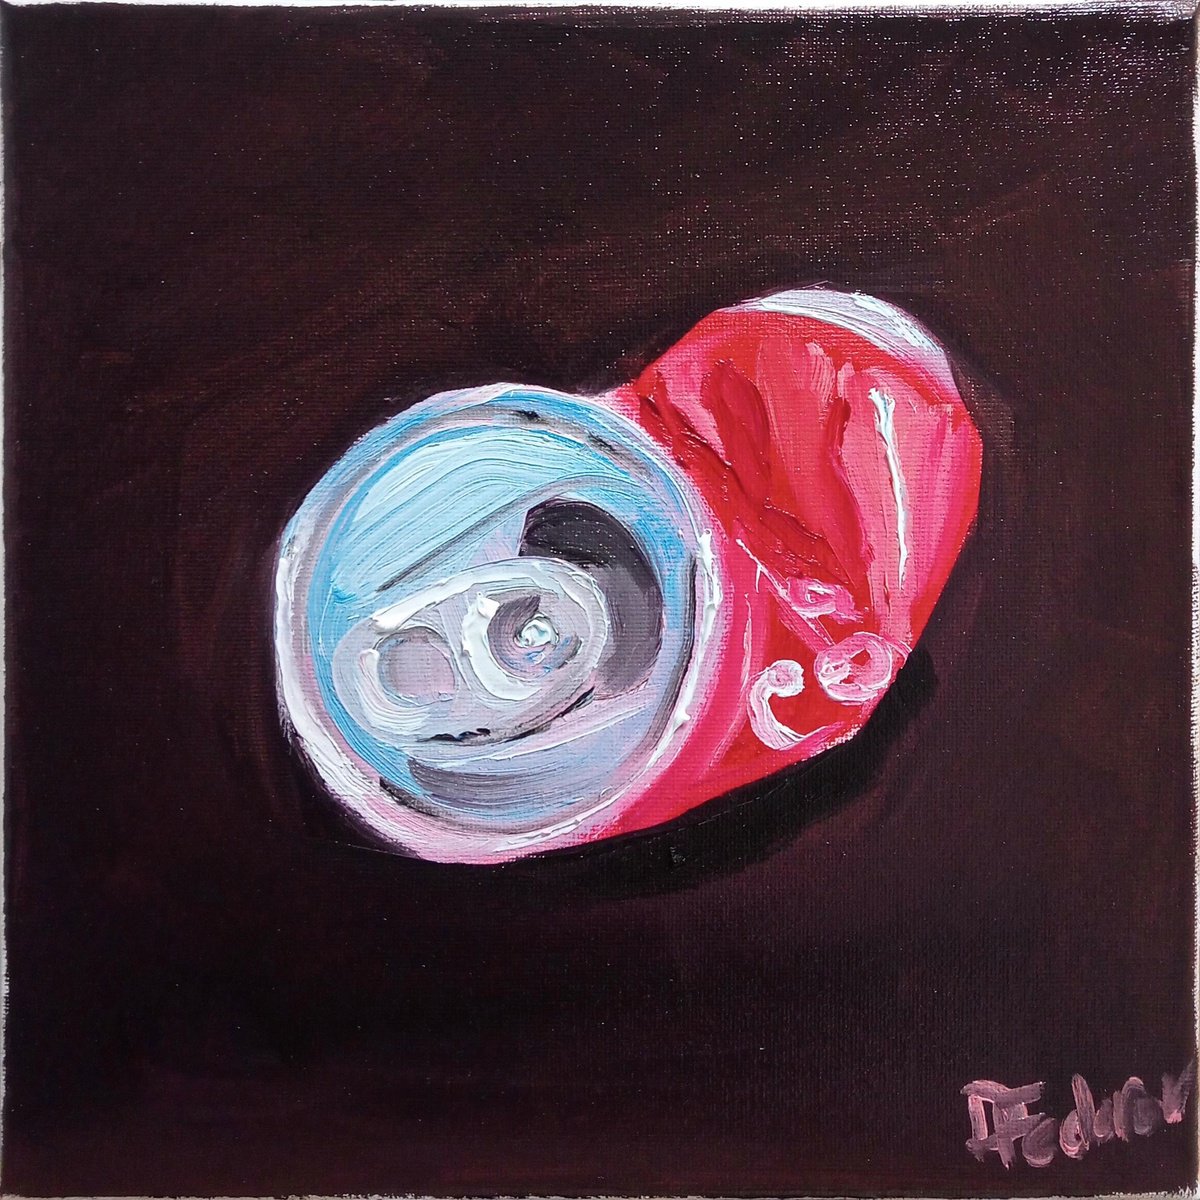 Still life with a crushed cola can by Dmitry Fedorov